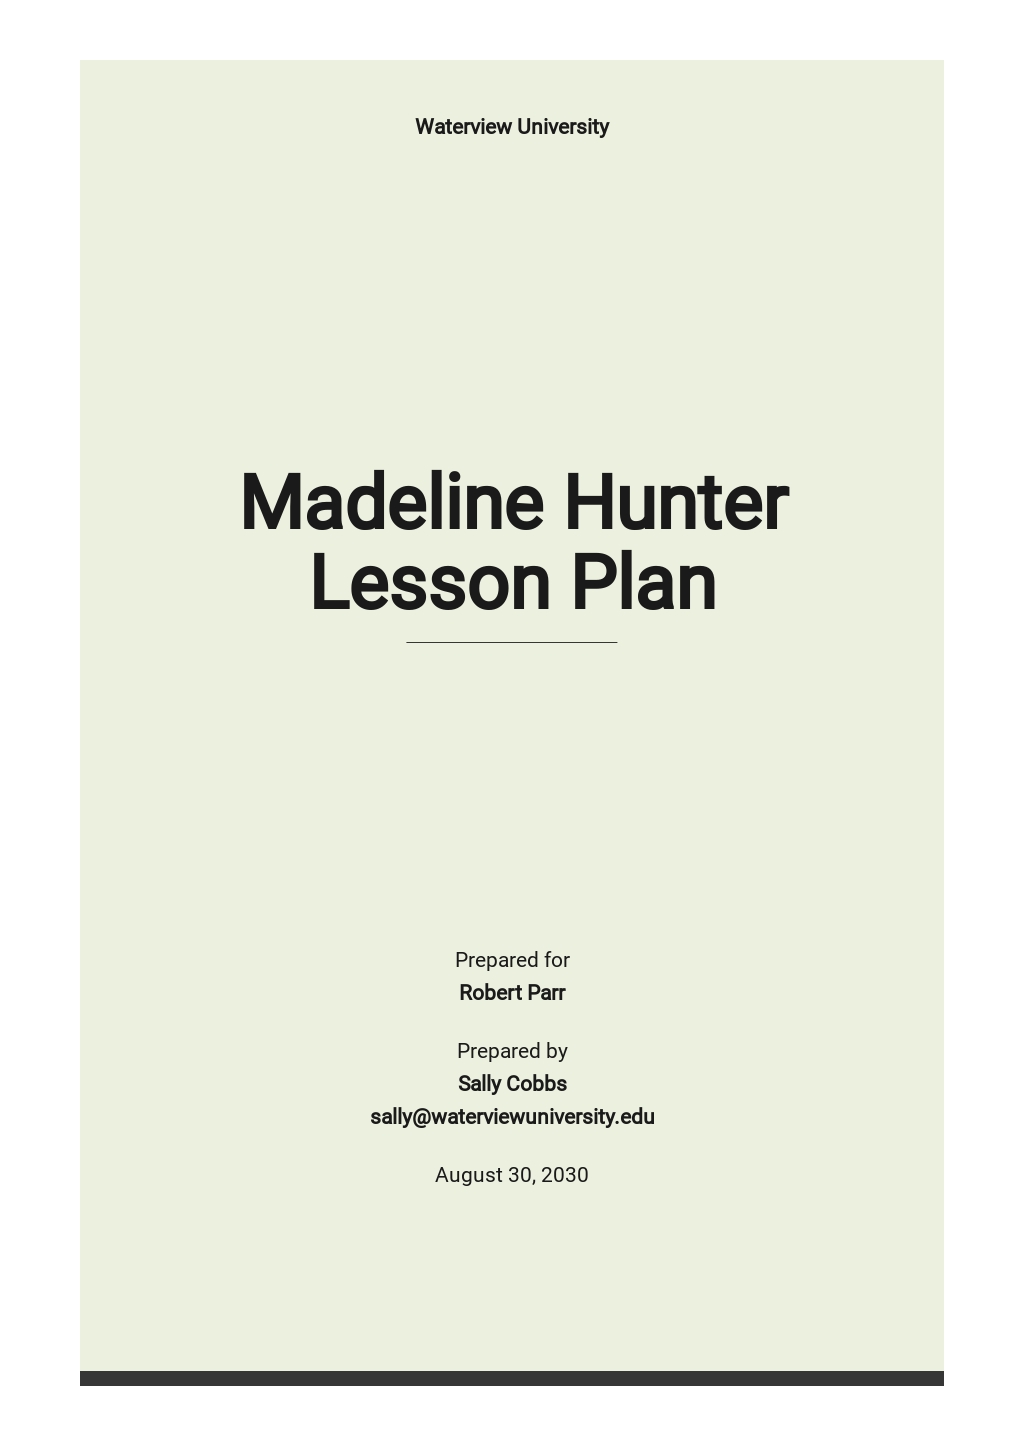 madeline-hunter-lesson-plan-template-word-card-template